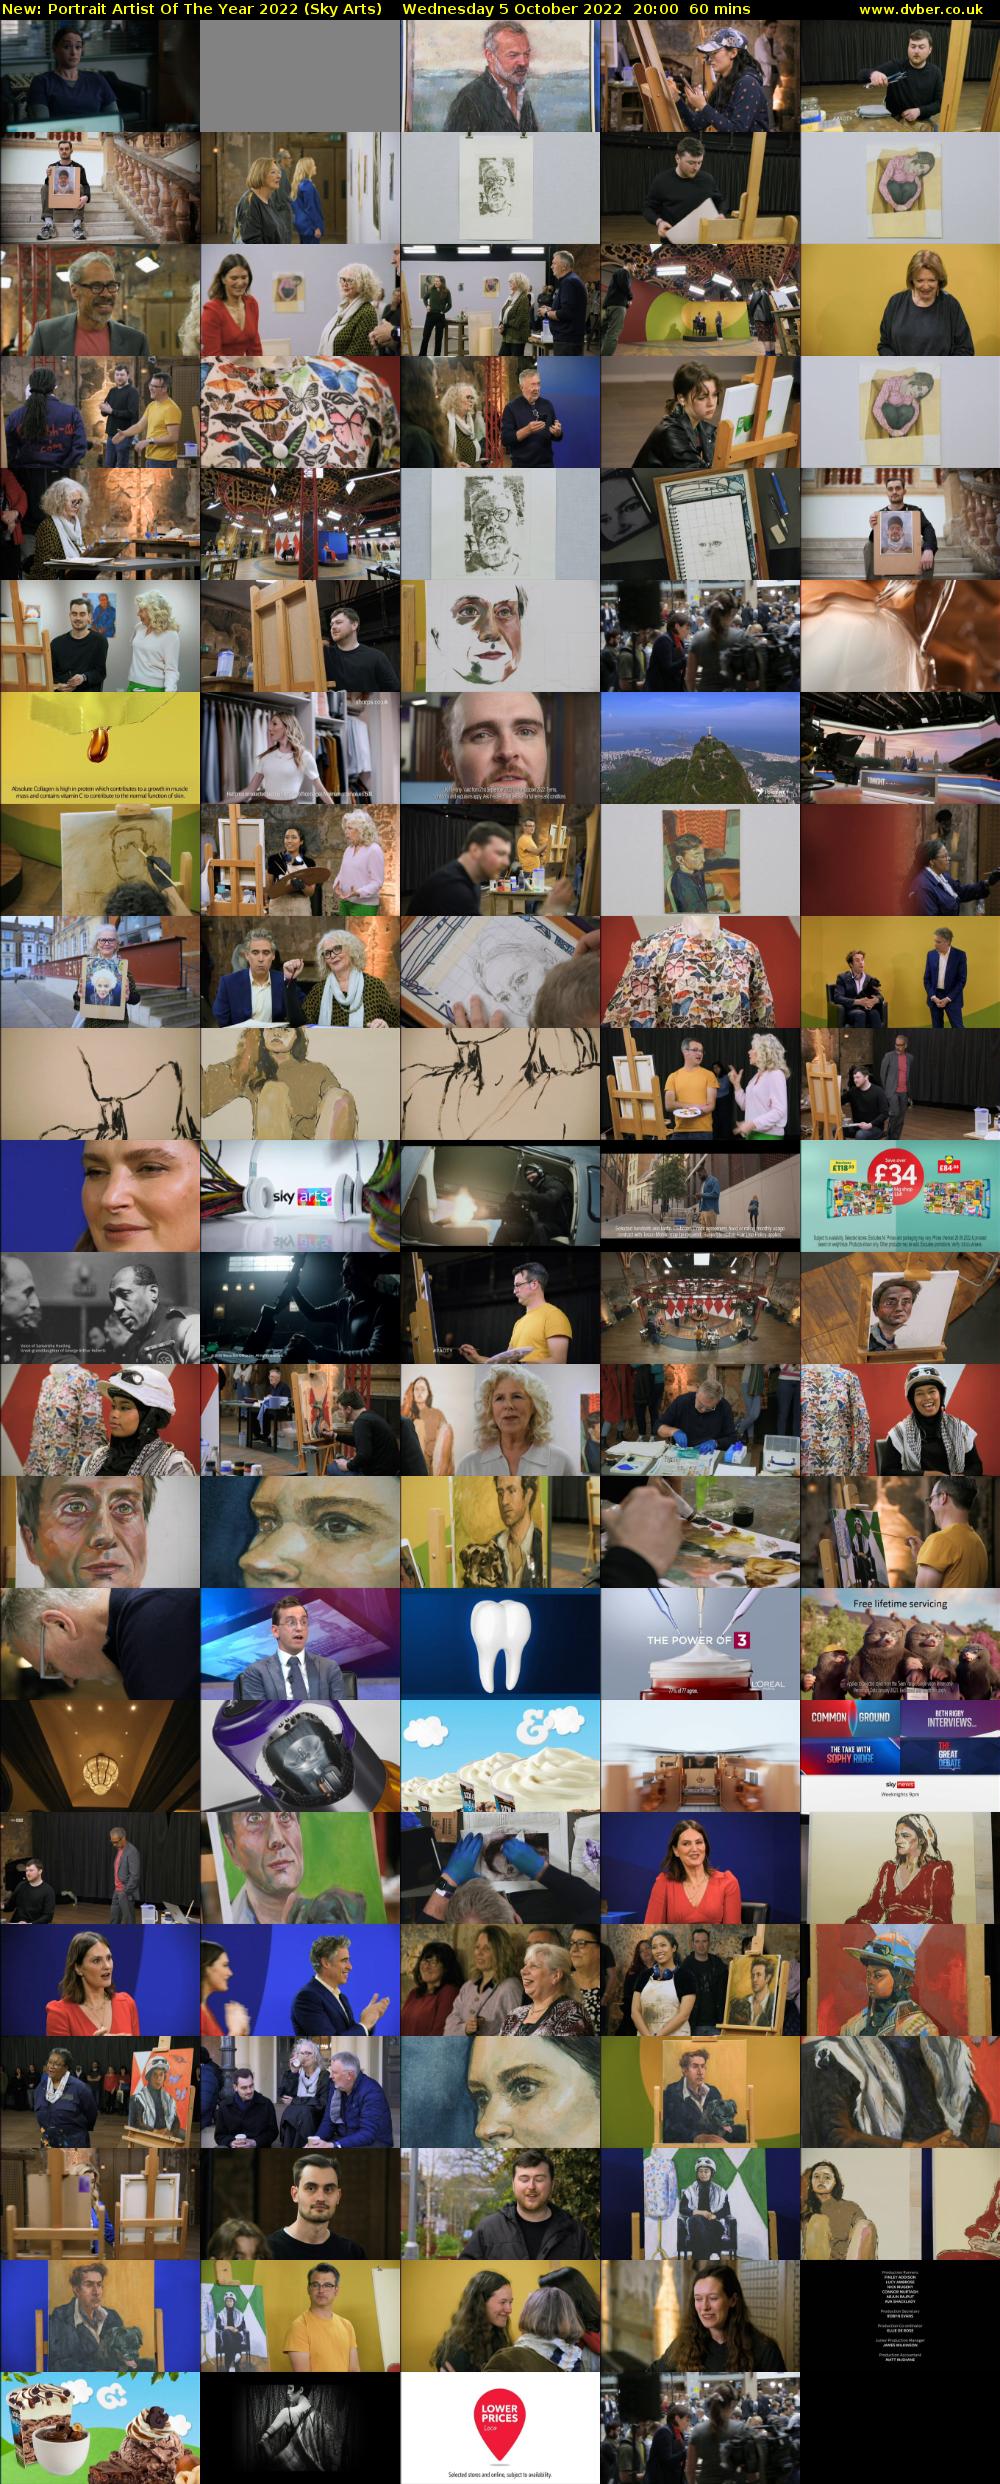 Portrait Artist Of The Year 2022 (Sky Arts) Wednesday 5 October 2022 20:00 - 21:00